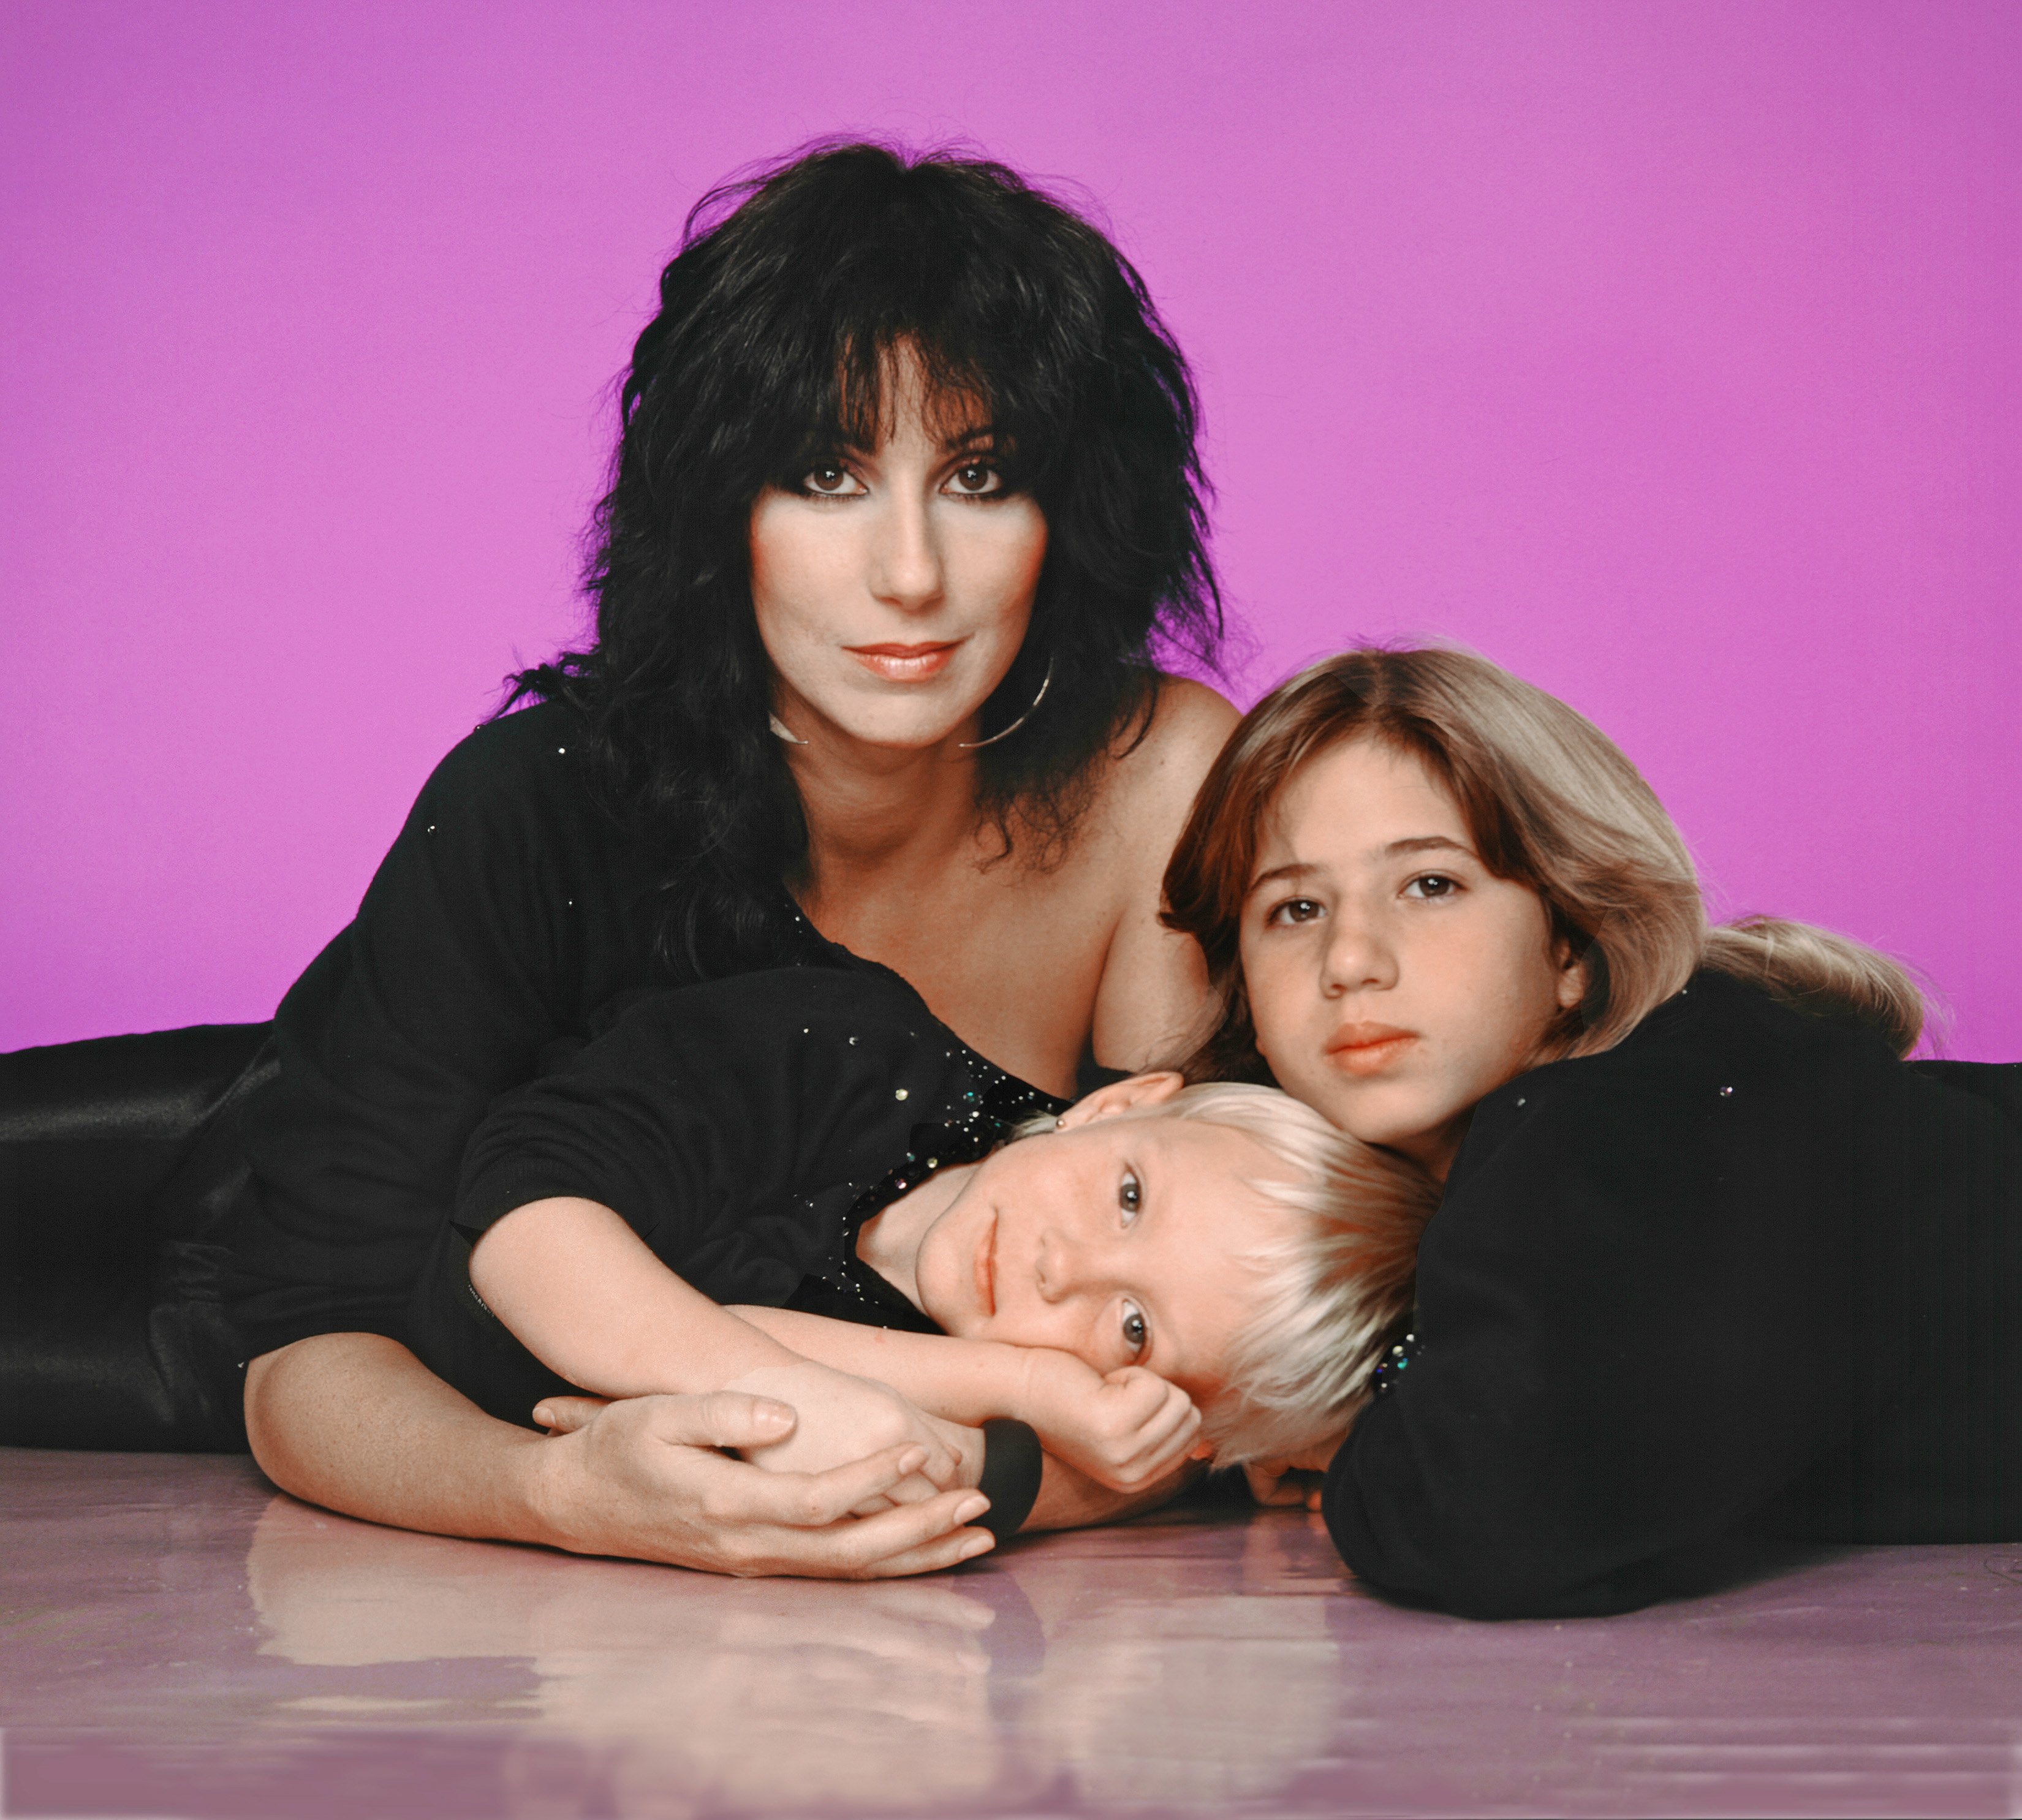 Cher, daughter Chastity Bono, and son Elijah Blue Allman pose for a photo in 1980 in Los Angeles, California | Source: Getty Images